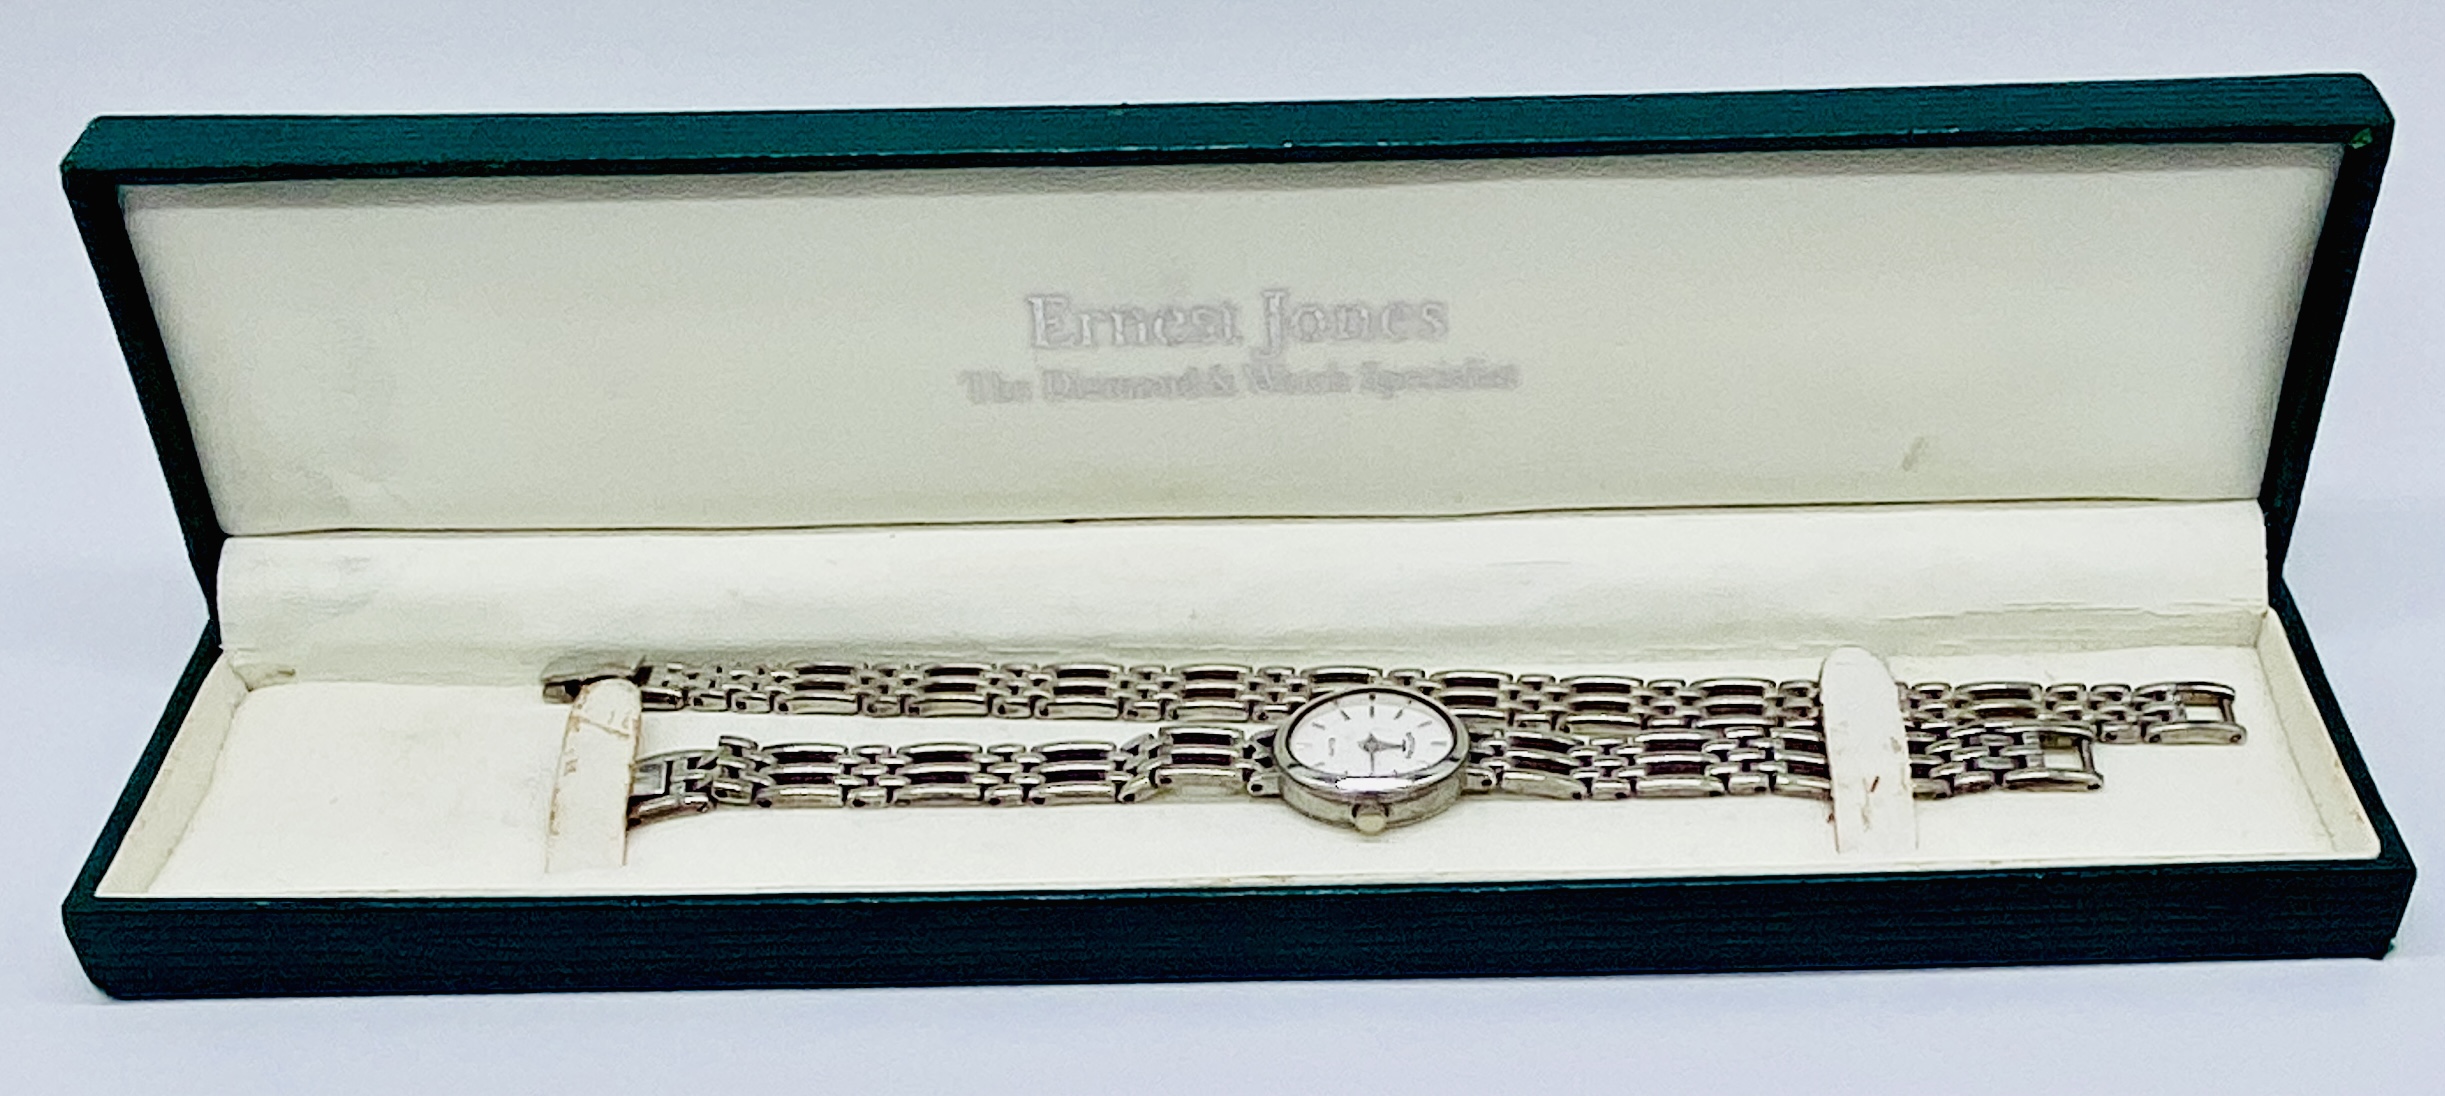 A ladies Rotary Elite Sterling silver wristwatch along with a matching bracelet